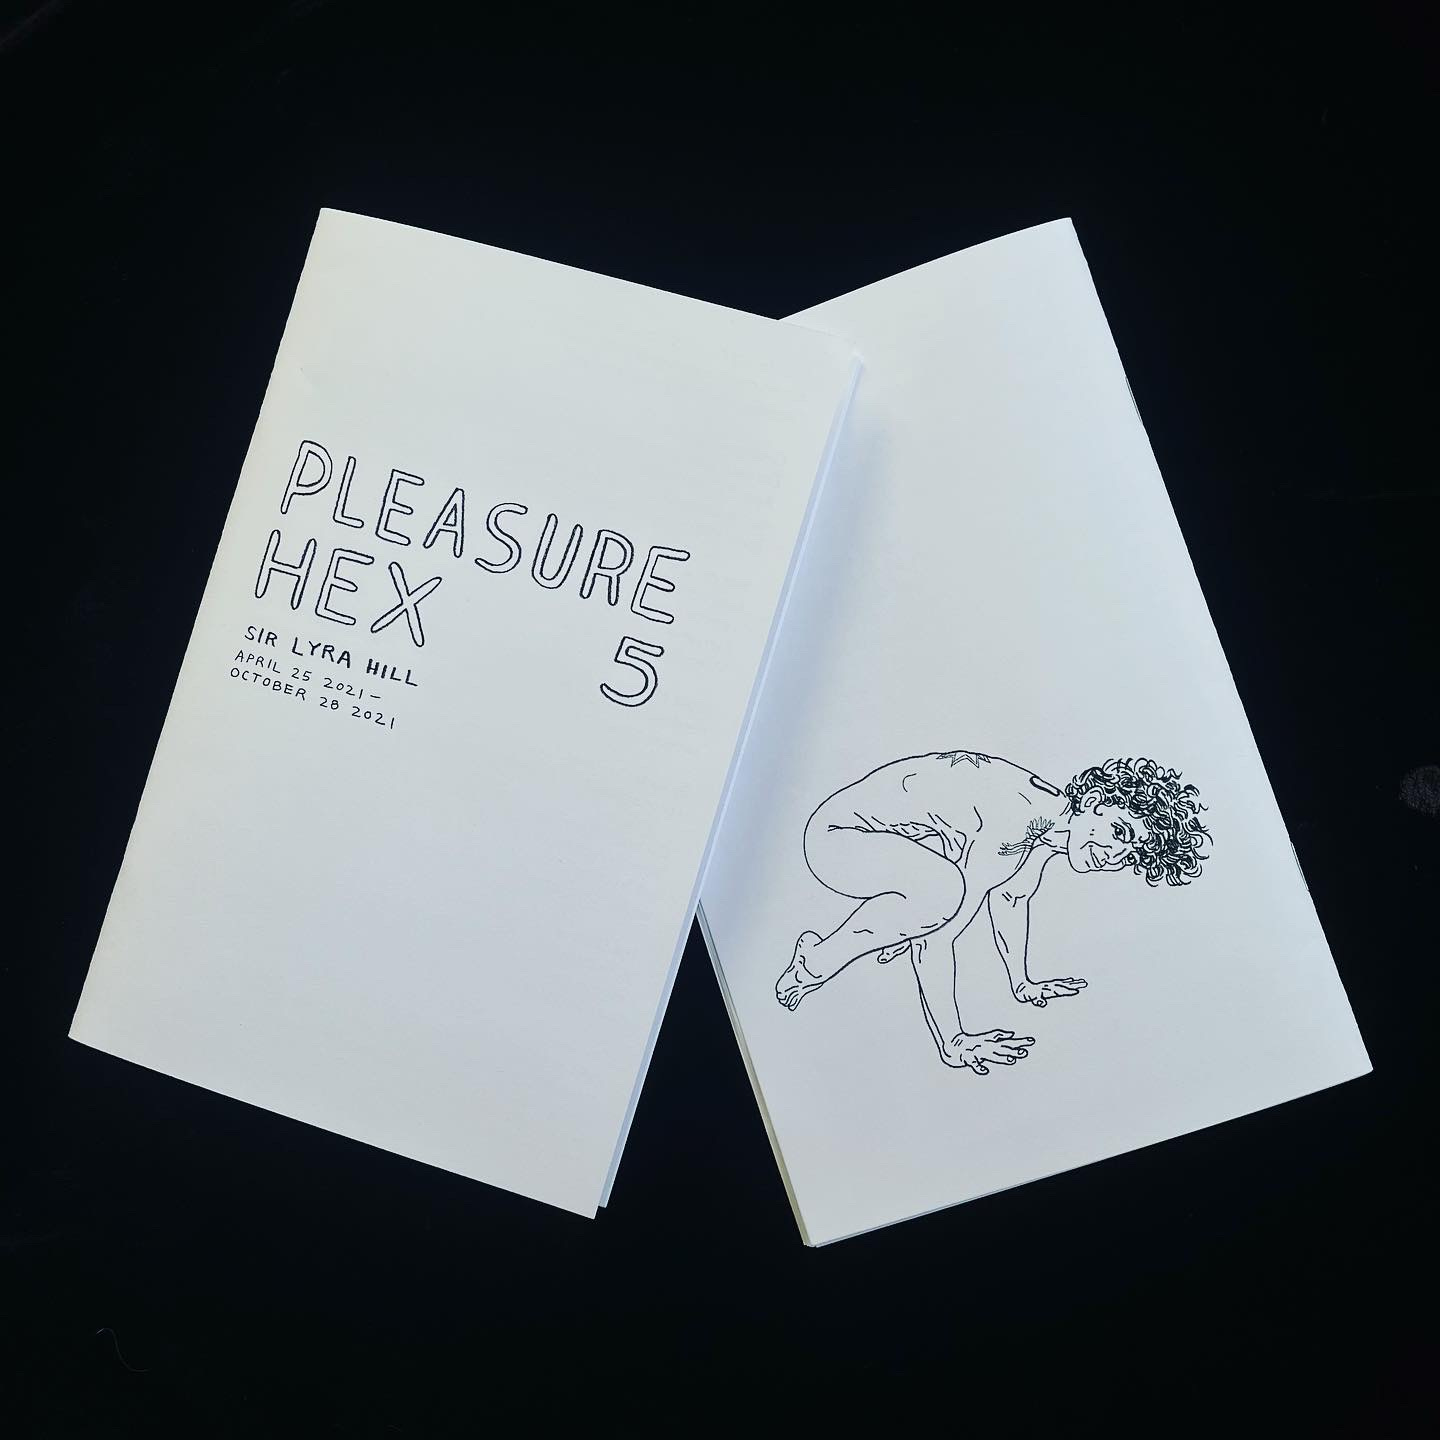 photograph of the front and back covers of Pleasure Hex issue #5